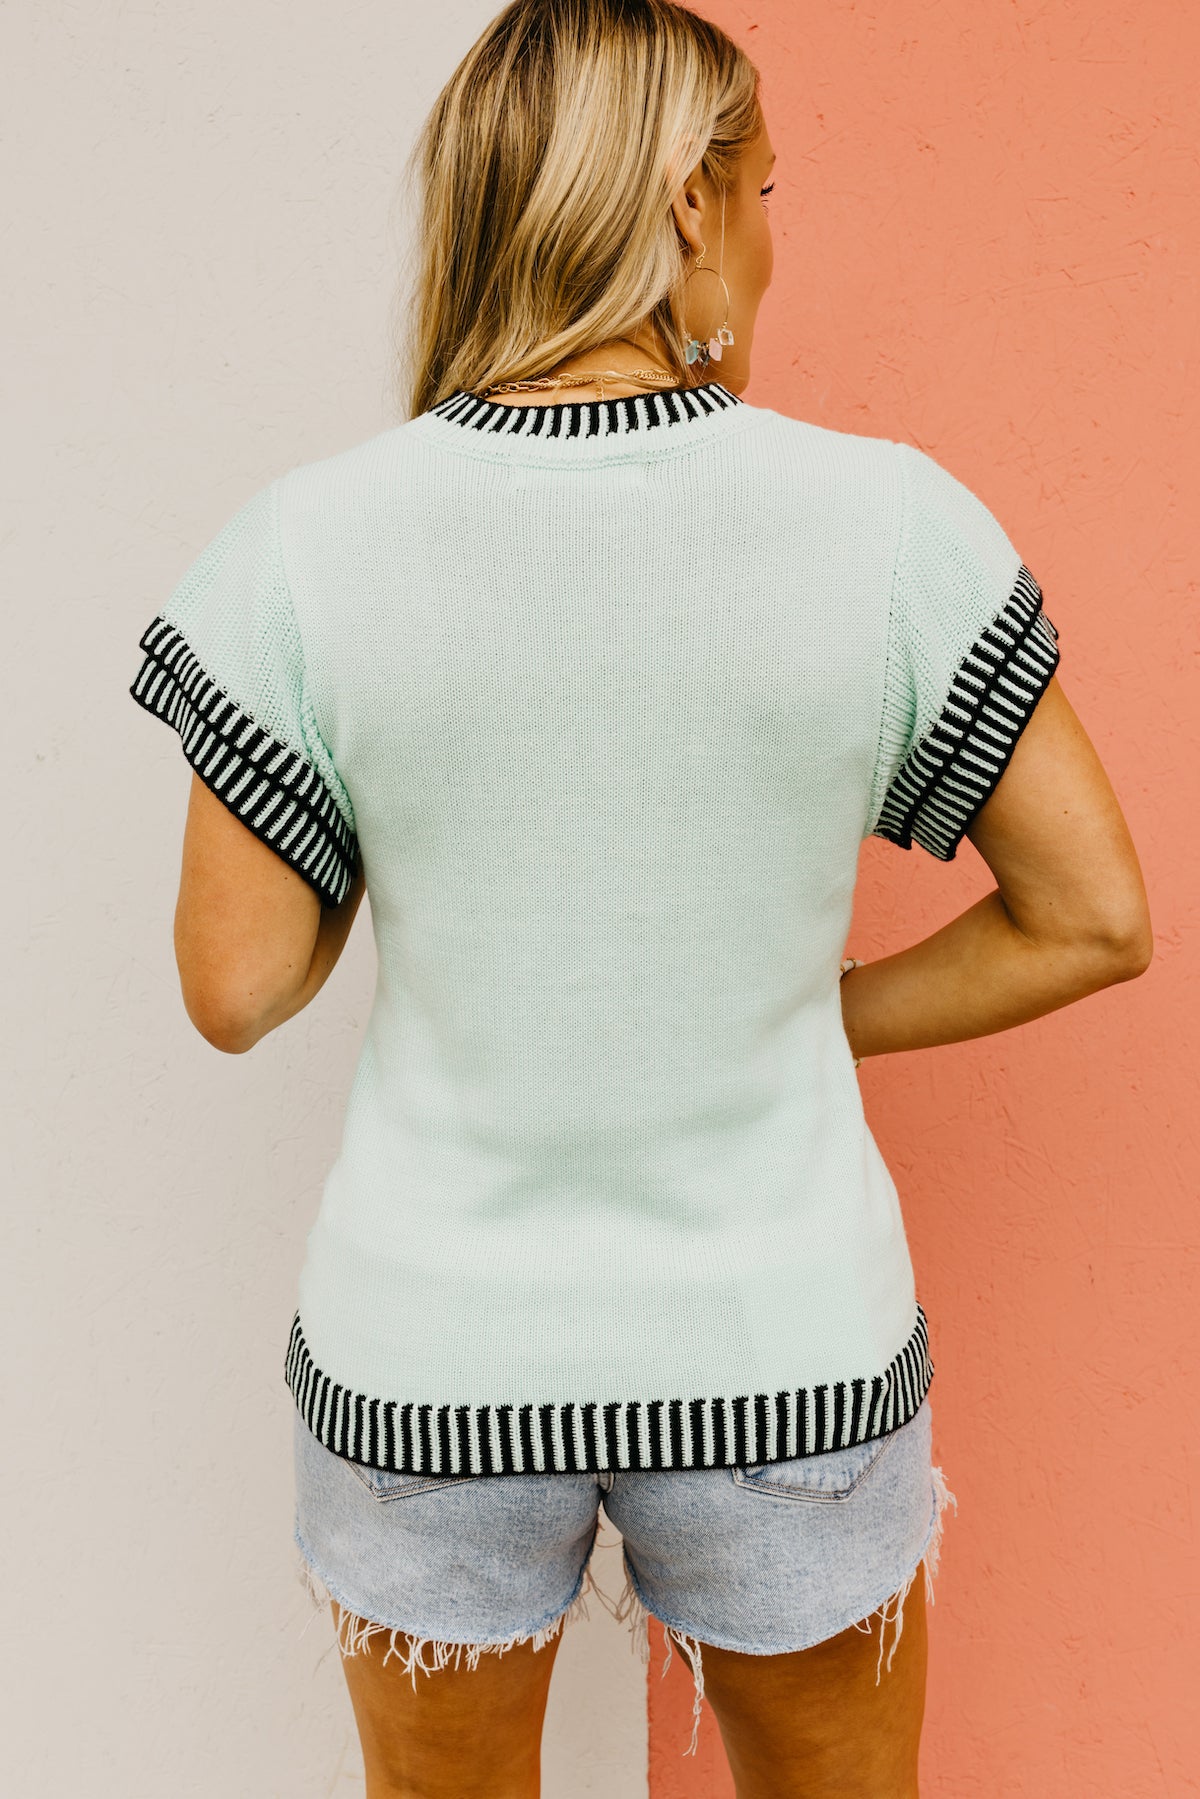 The Jacoby Embroidered Stitch Sweater